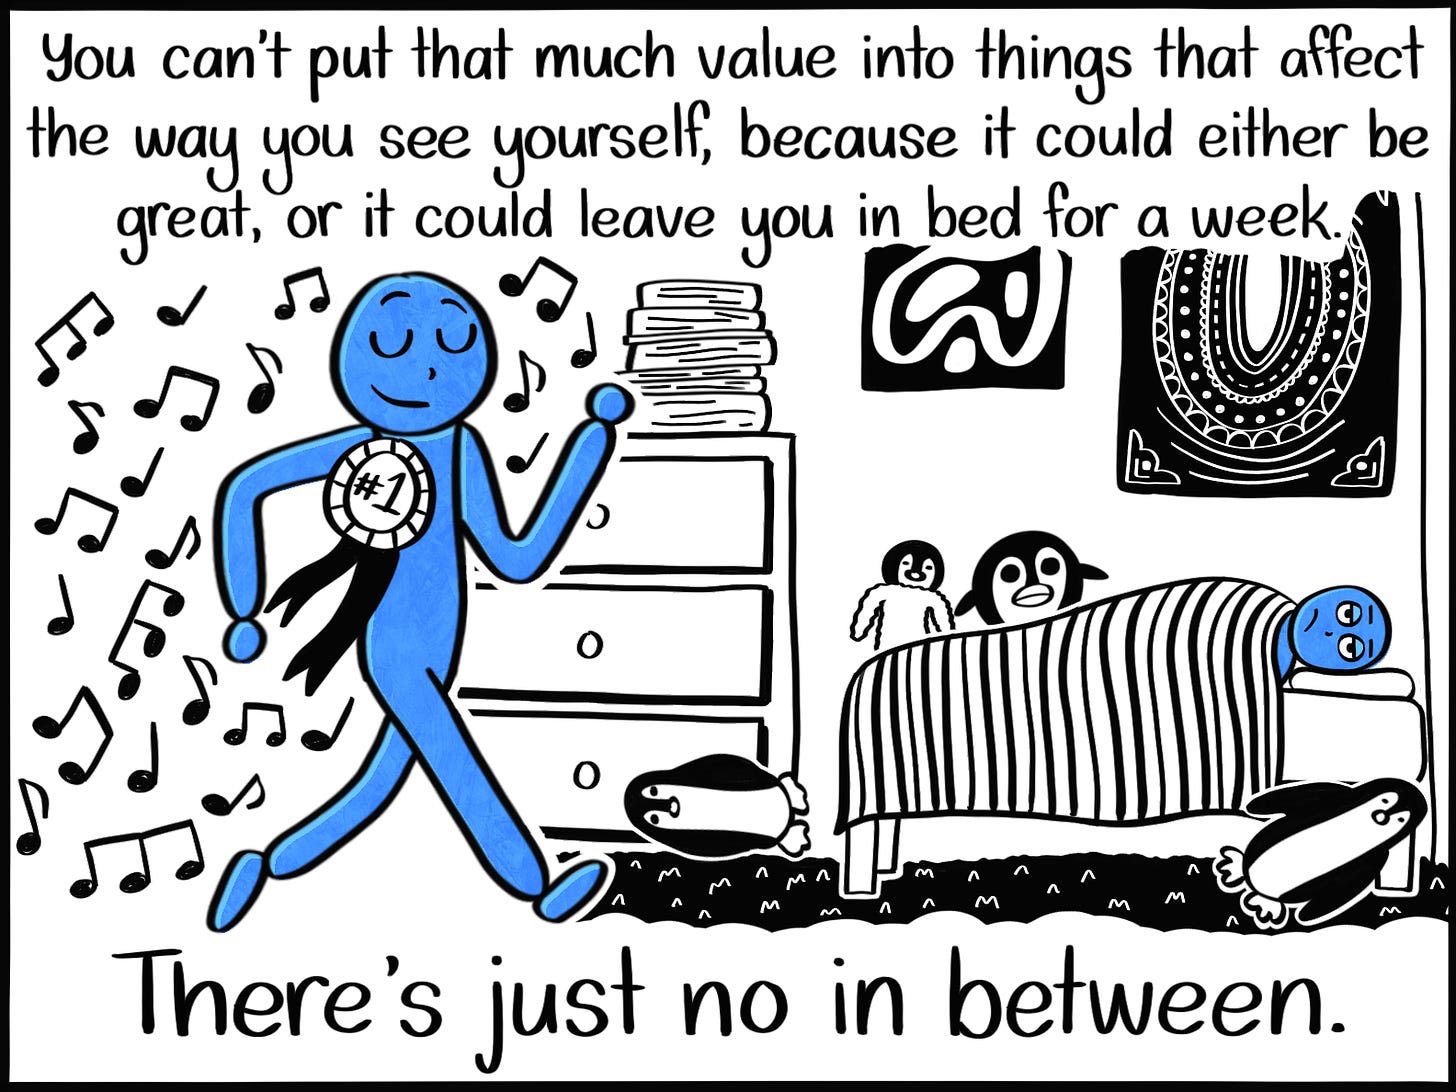 Caption: You can't put that much value into things that affect the way you see yourself, because it could be great, or it could leave you in bed for a week. There's just no in between. Image: On the left, the blue person marching with a #1 ribbon on their chest, musical notes surrounding them signifying gleeful humming. On the right, the blue person lying in bed, emotionless, penguins scattered around the room.